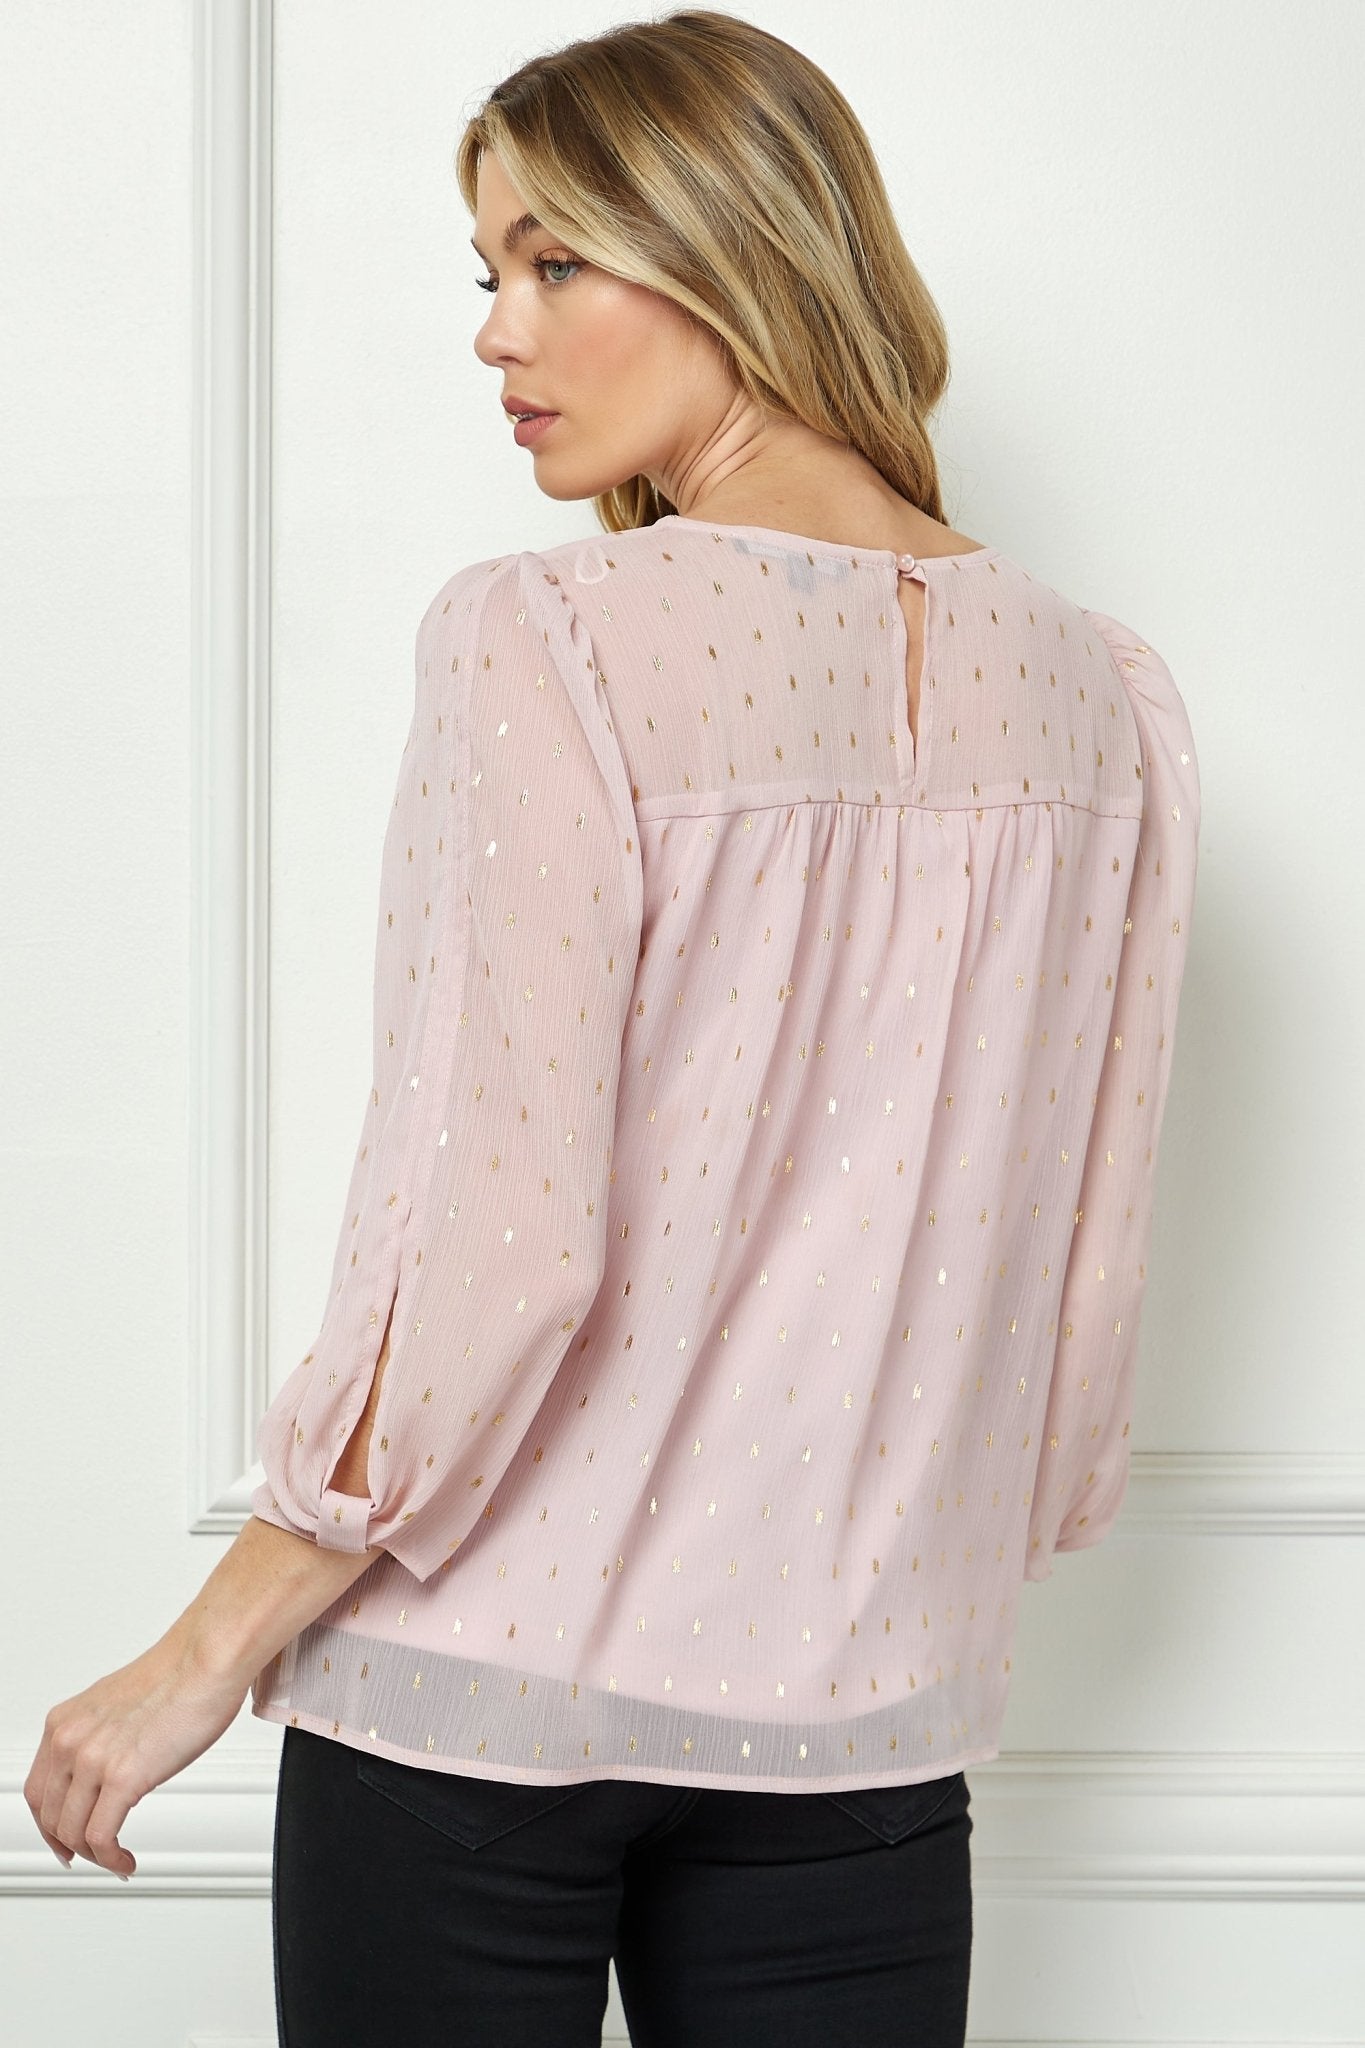 Sara Michelle Mauve & Gold 3/4 Knot Sleeve Scoop Neck Lined Blouse - DressbarnShirts & Blouses